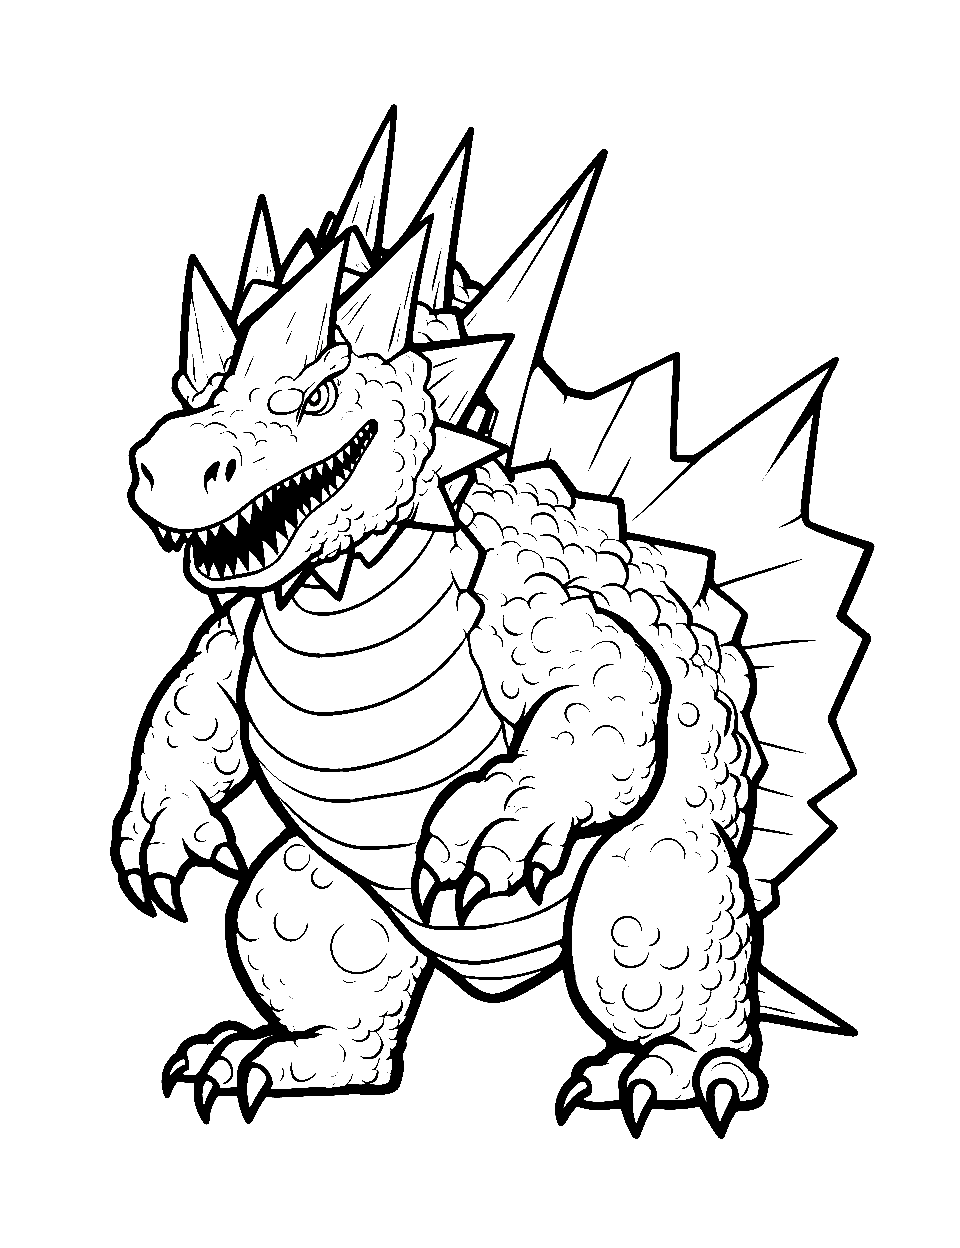 Space Godzilla's Crystals Coloring Page - Space Godzilla with its crystal spikes.